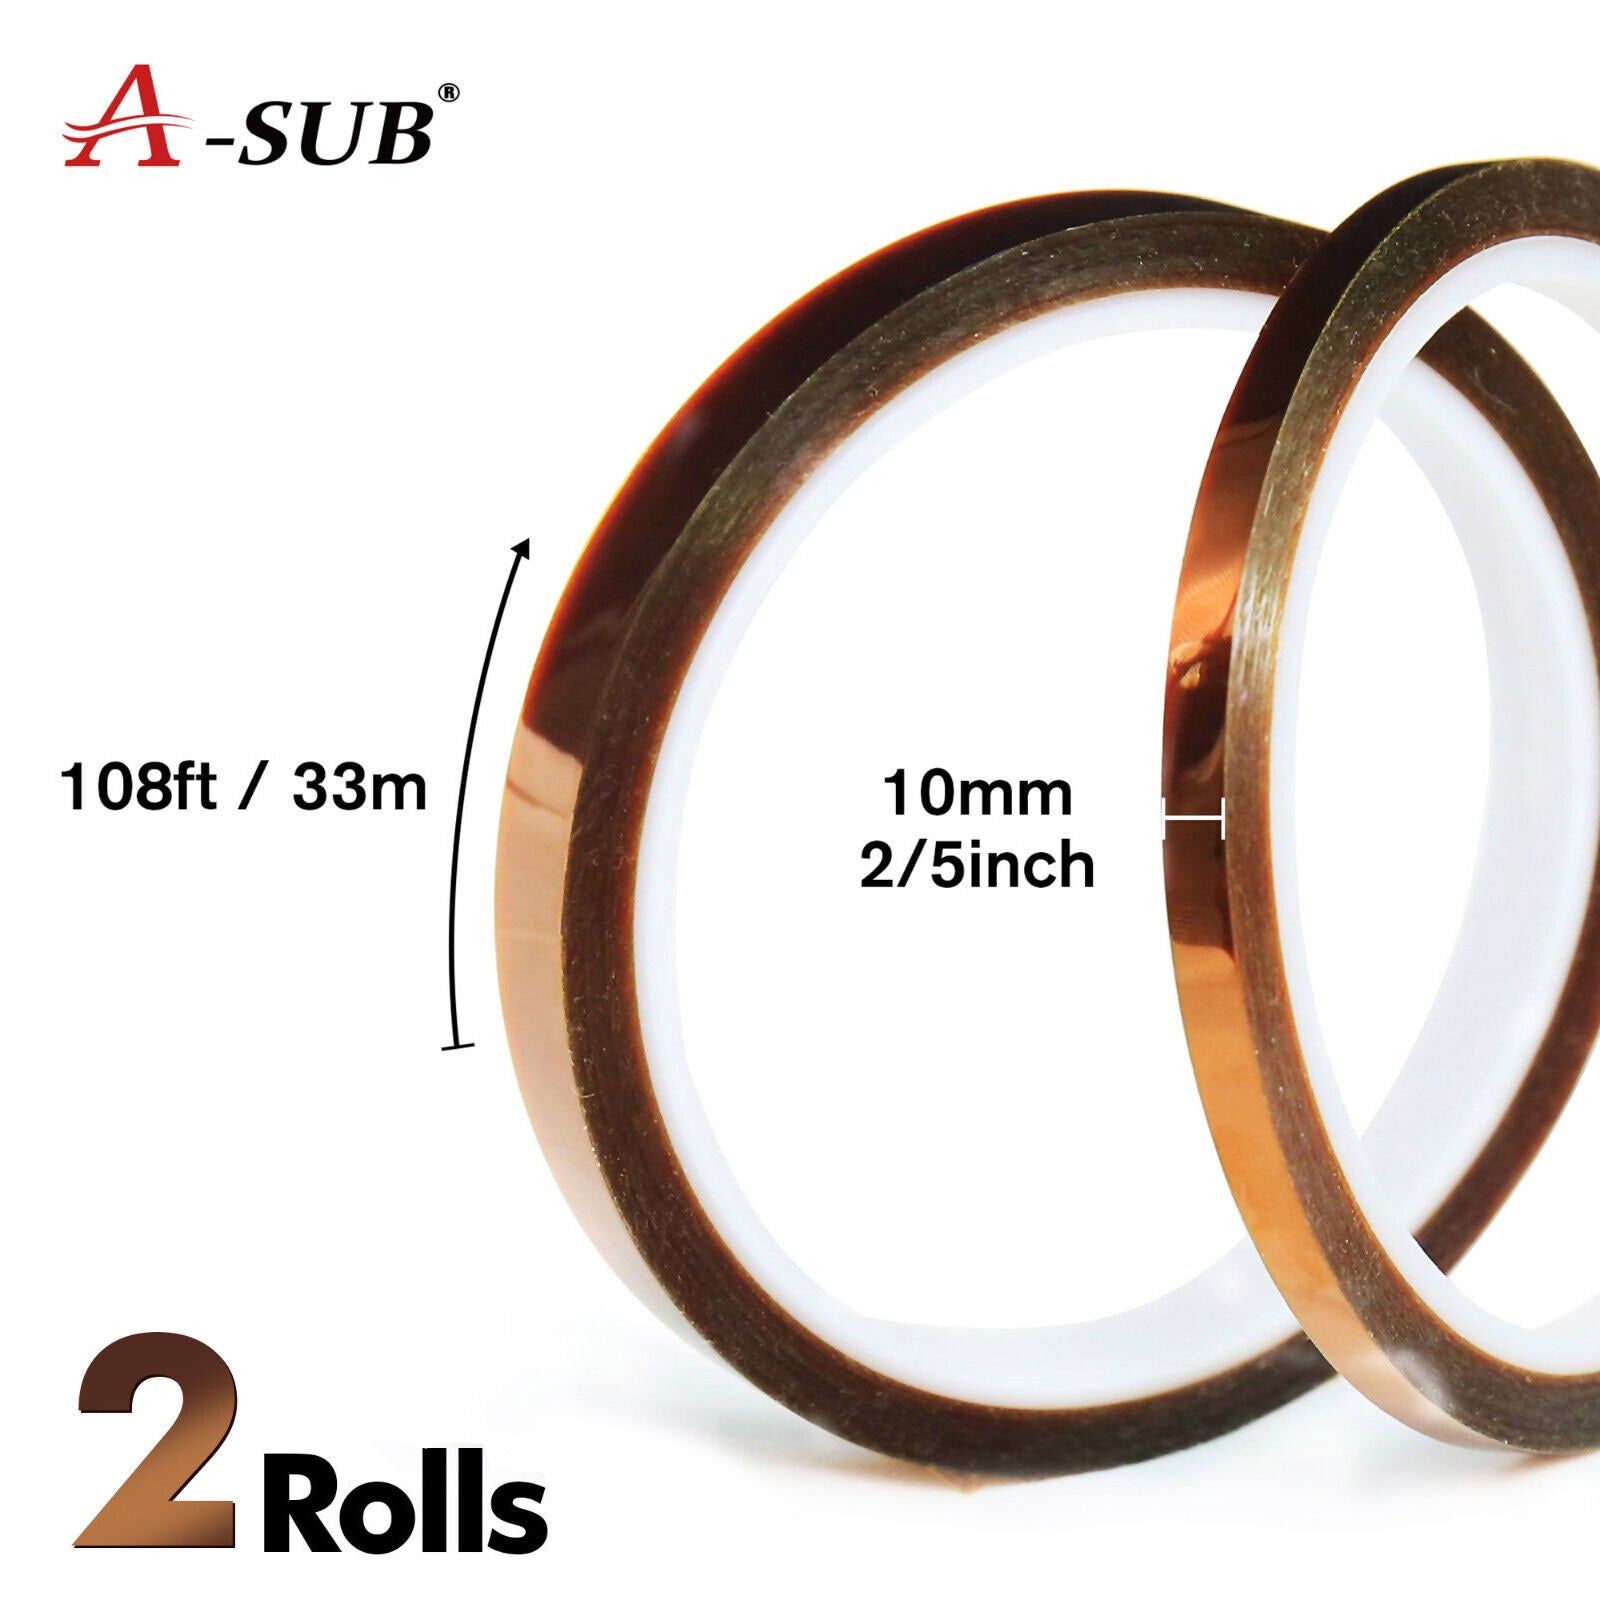 A-SUB 2 Rolls High Temperature Heat Resistant Tape 10mm 108ft